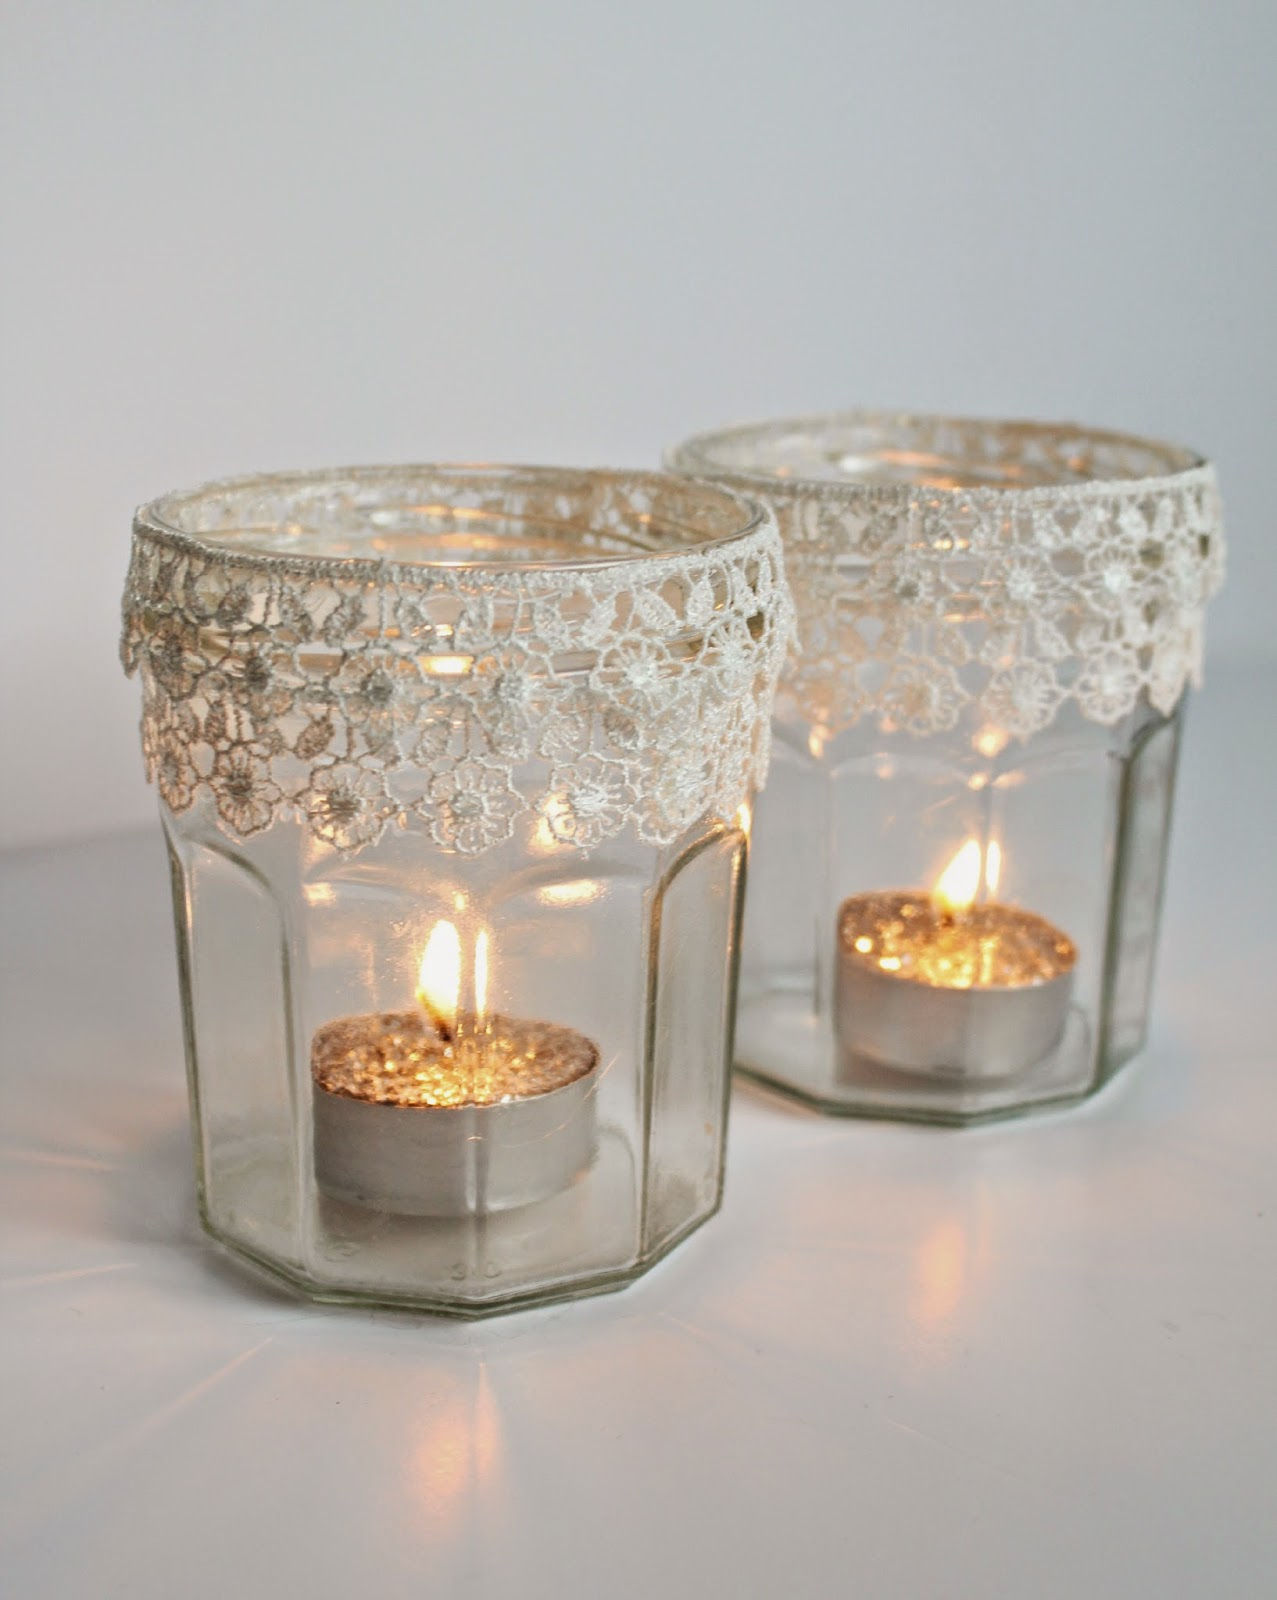 Lace Tealight Holders